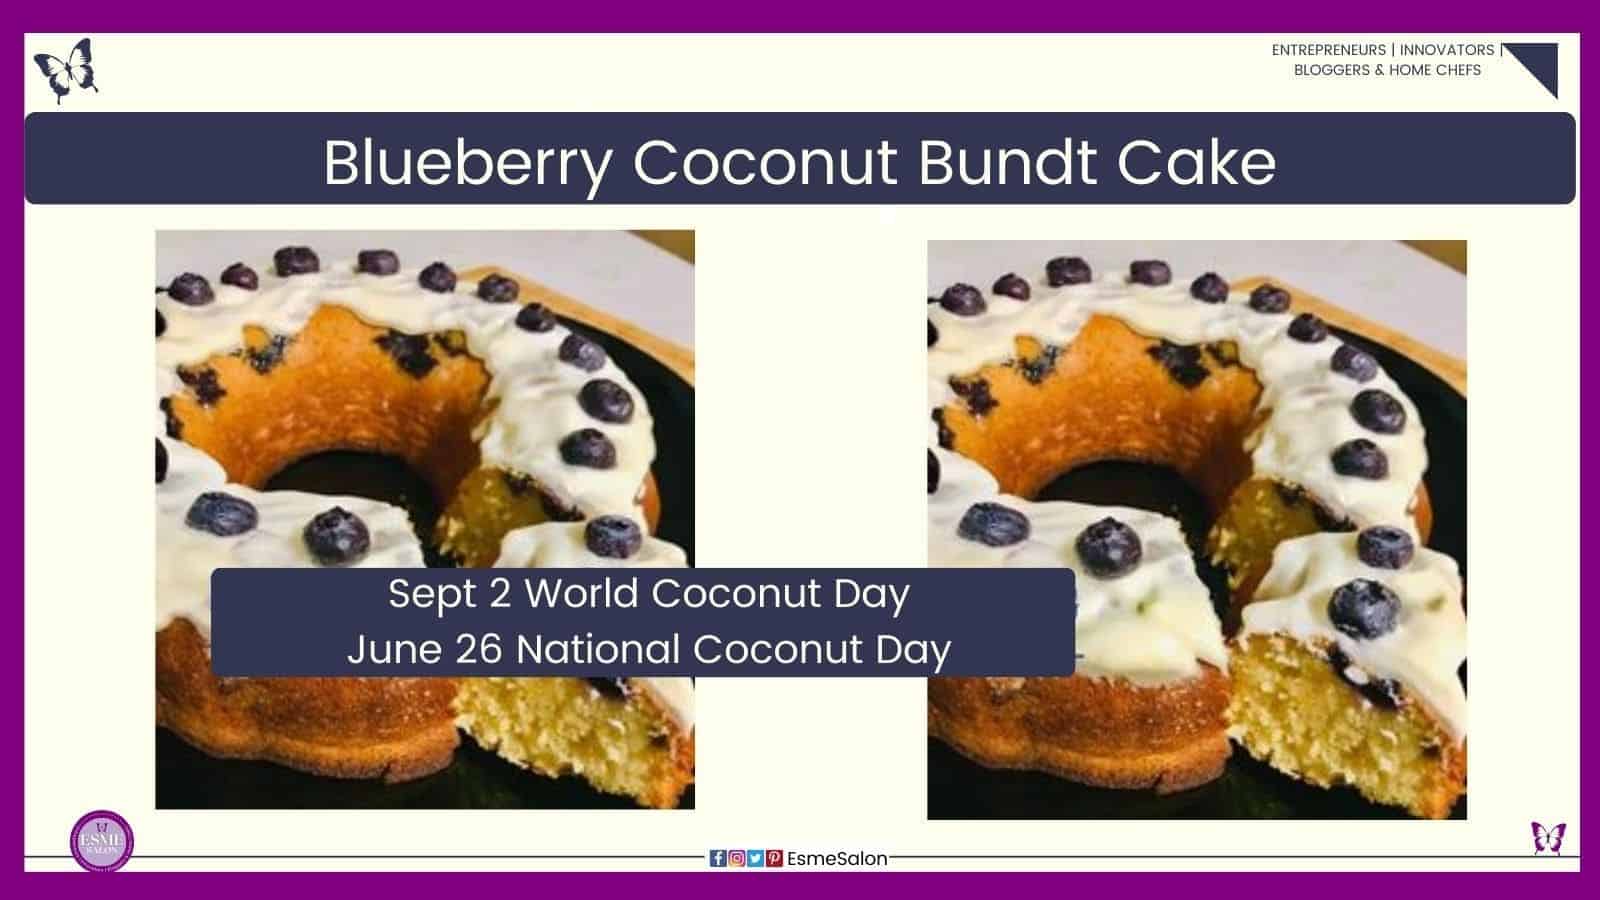 an image of a Blueberry Coconut Bundt Cake with cream cheese topping and decorated with blue berries